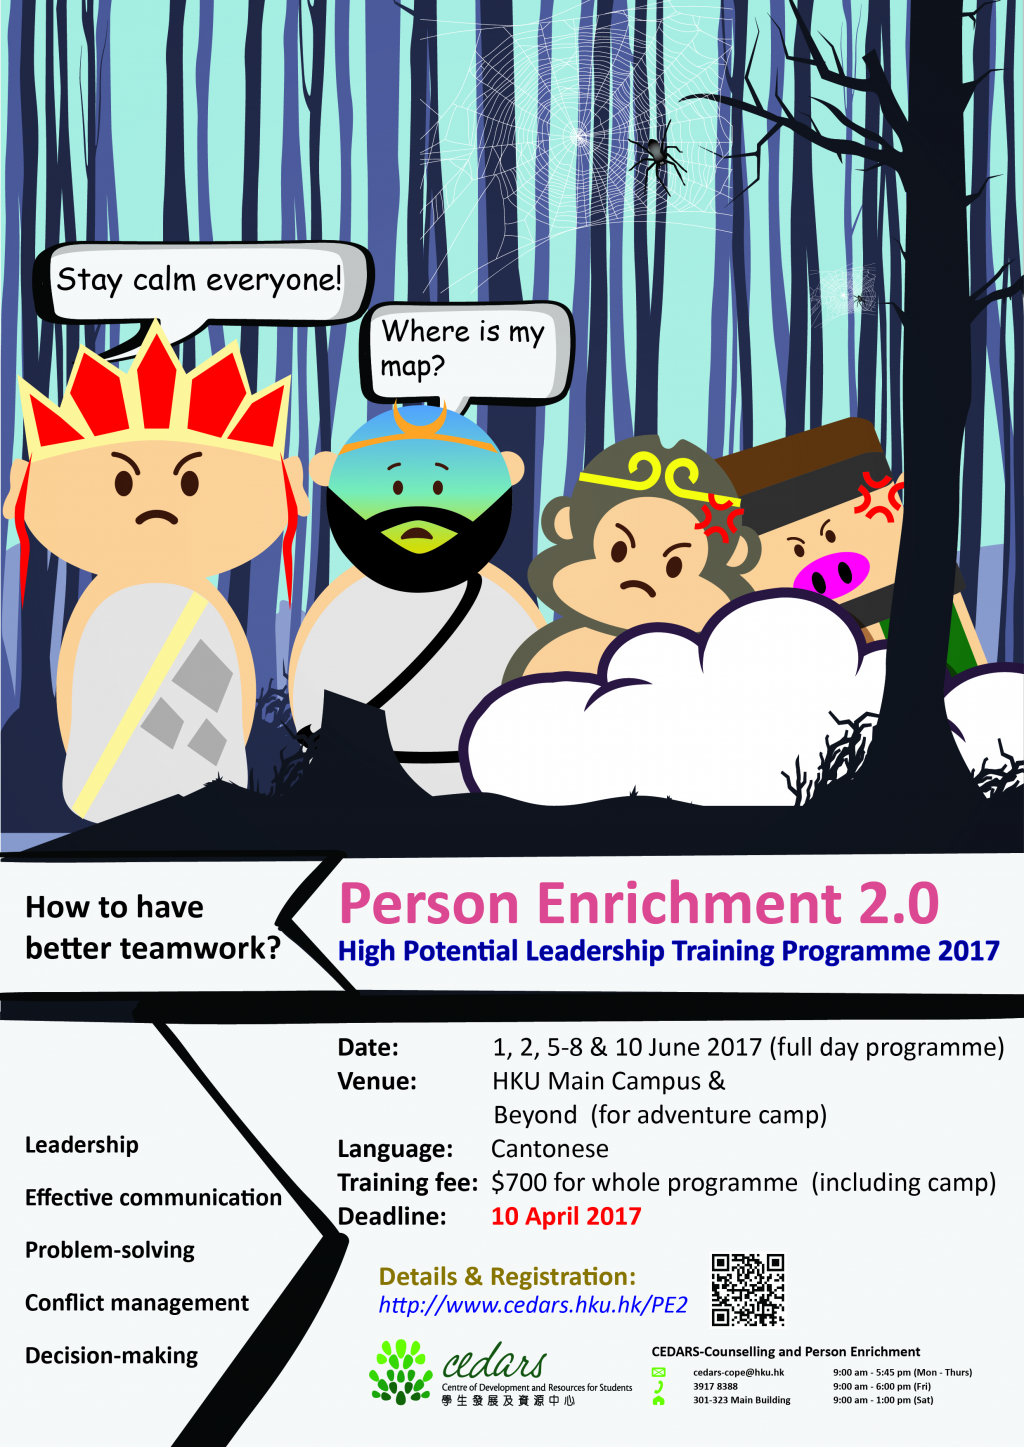 Person Enrichment 2.0 - High Potential Leadership Training Programme 2017